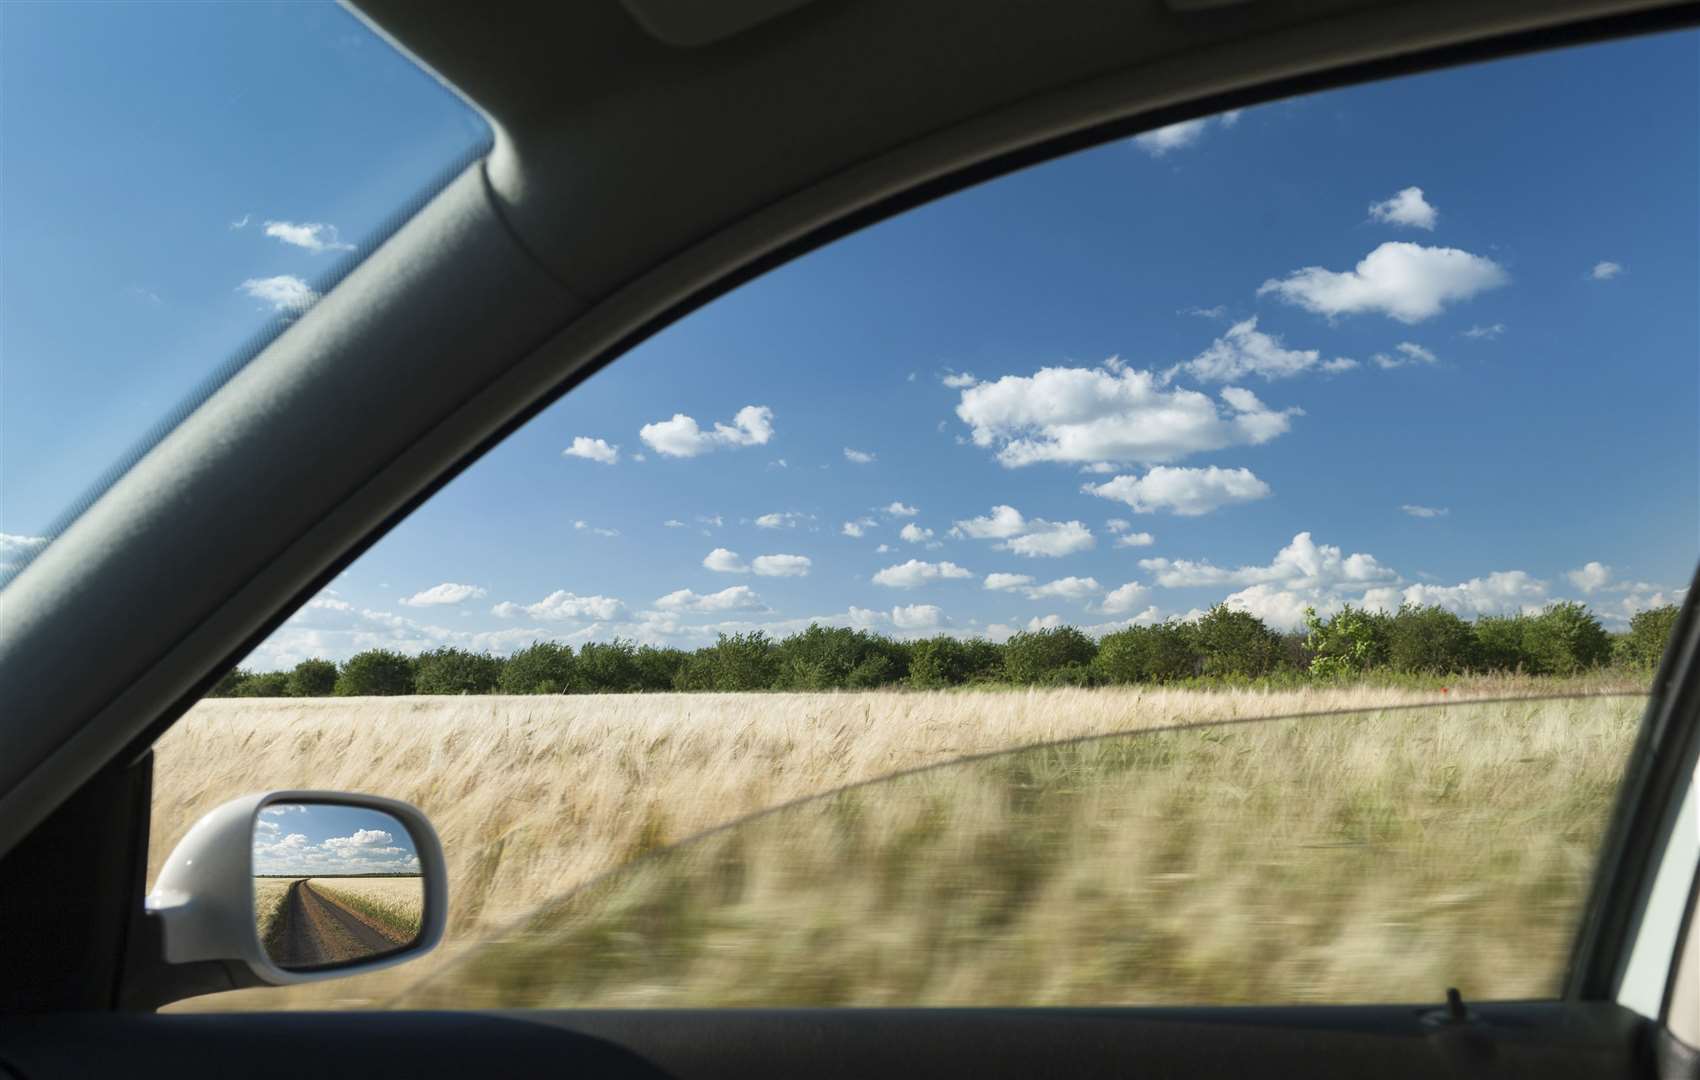 There are strict laws on how tinted car windows can be. Image: iStock.